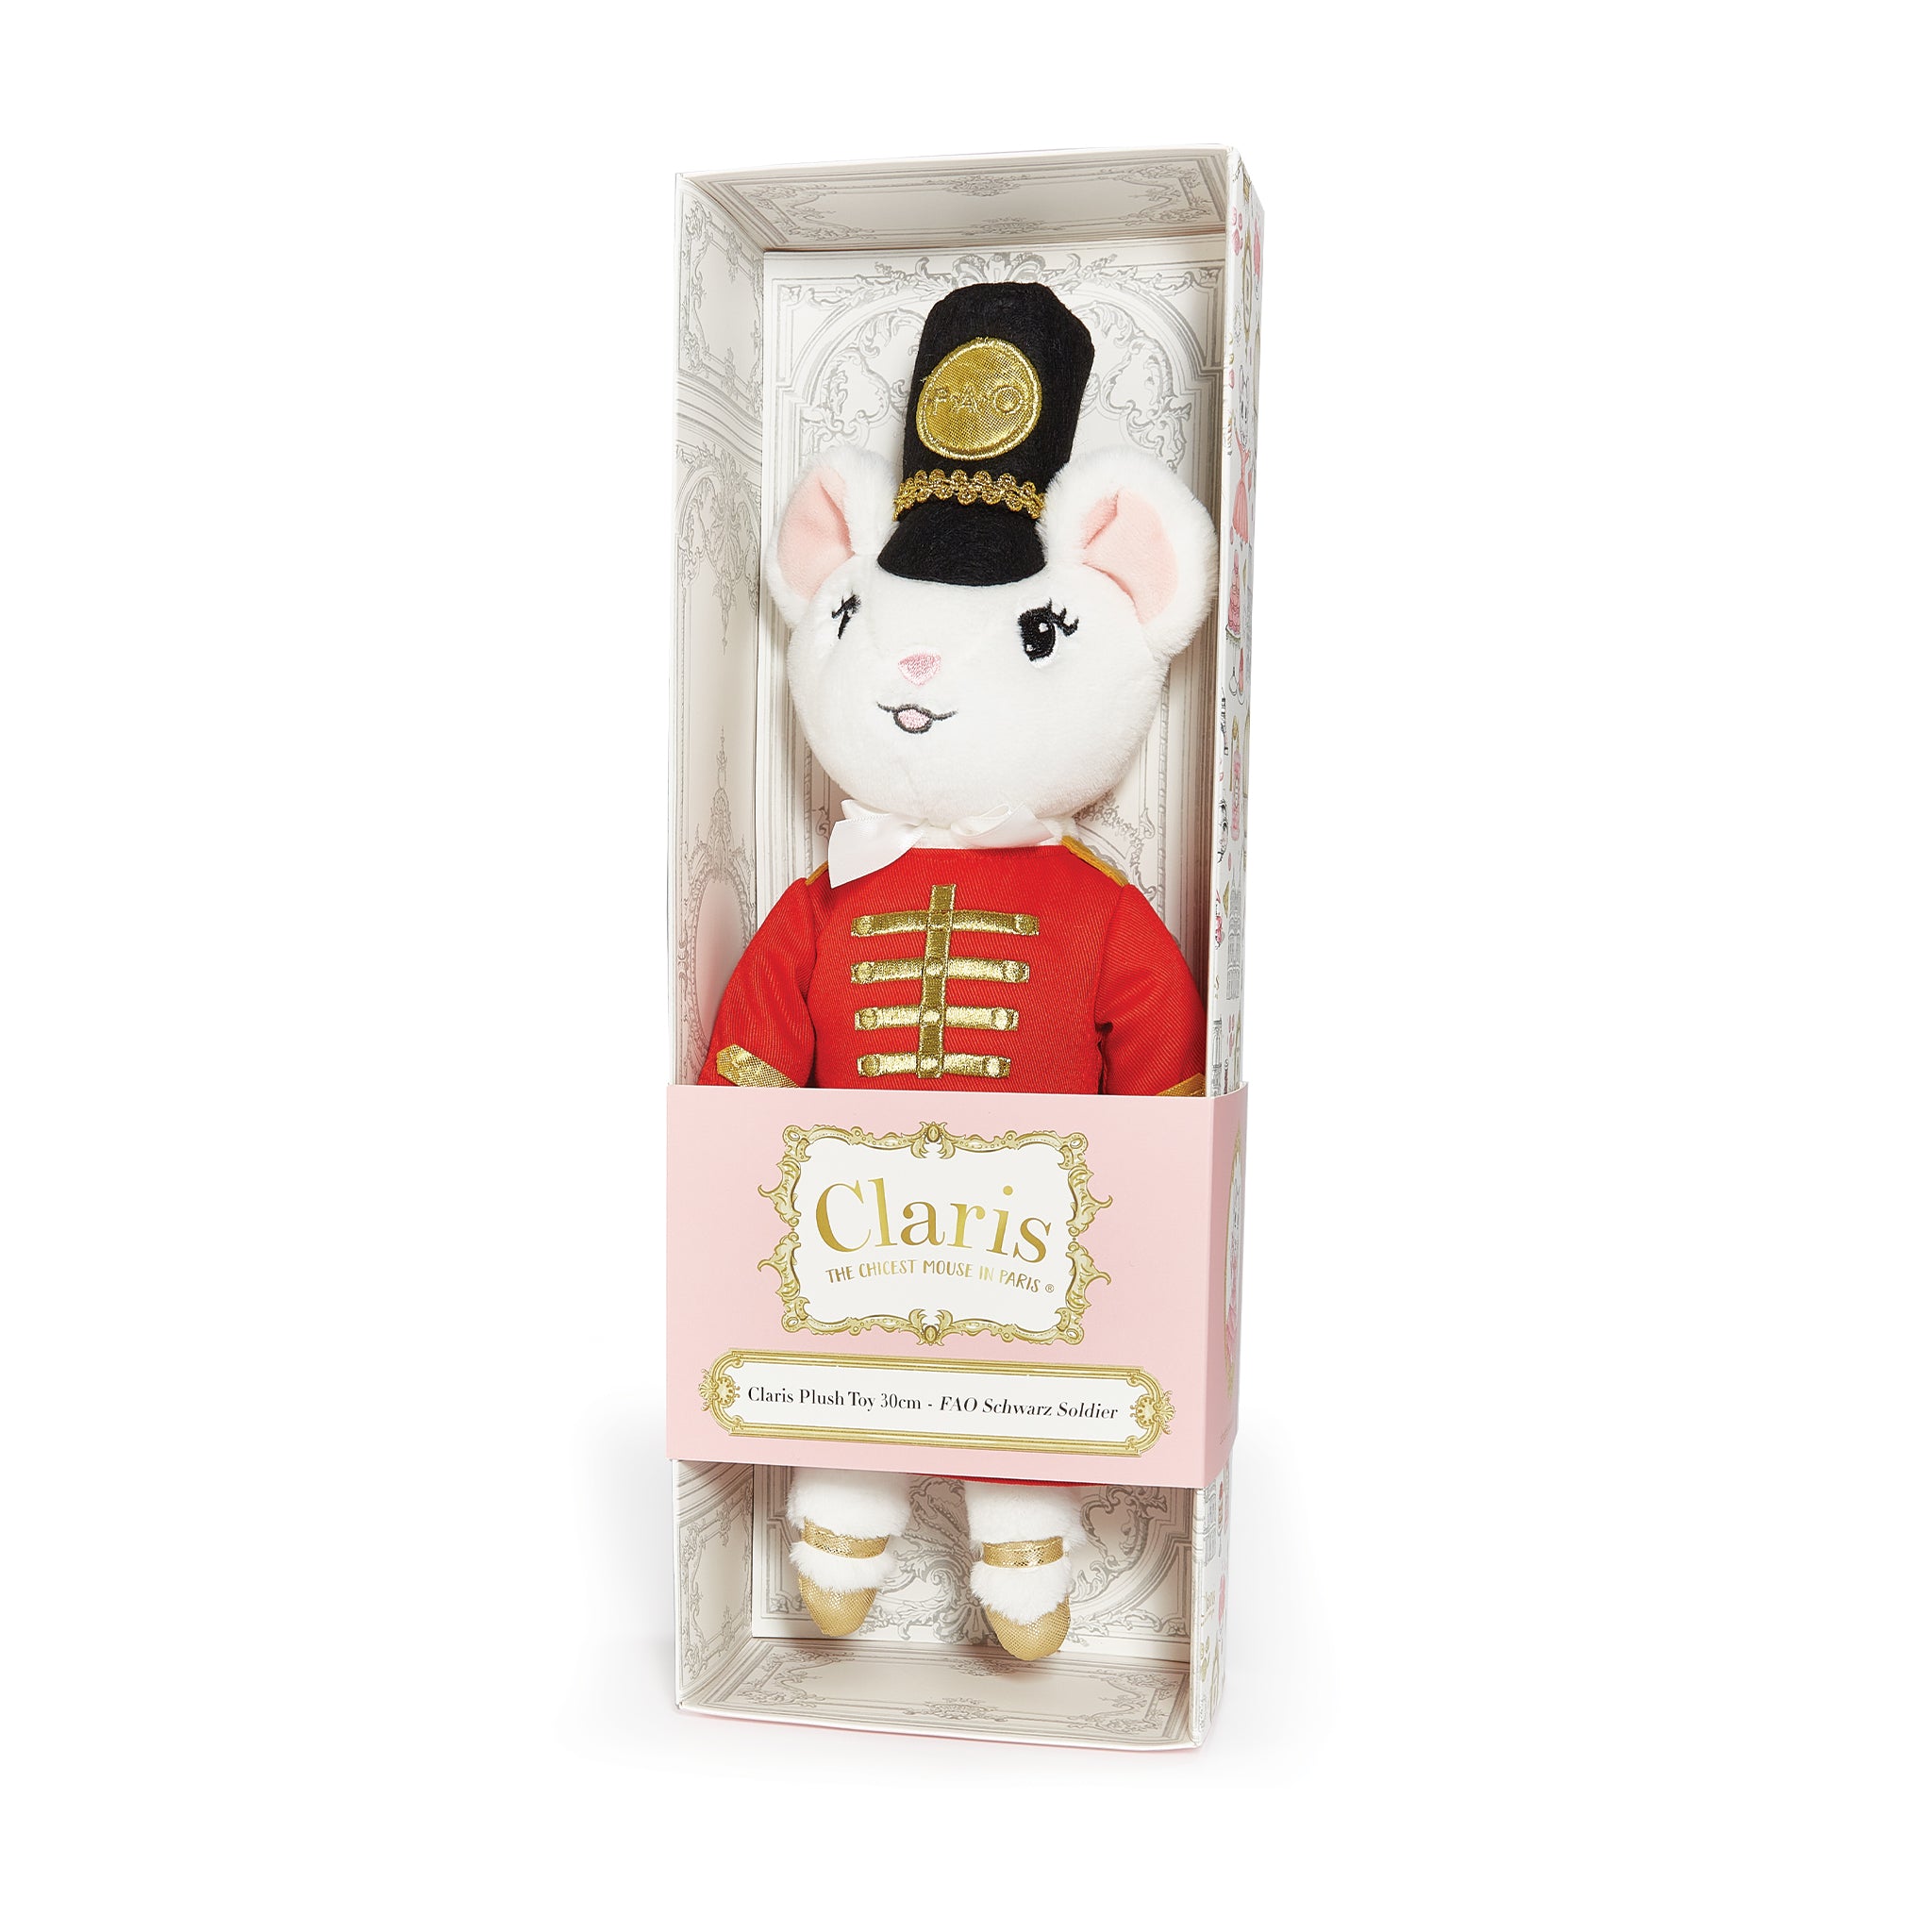 Claris The Mouse - Fao Schwarz Toy Soldier Plush Doll